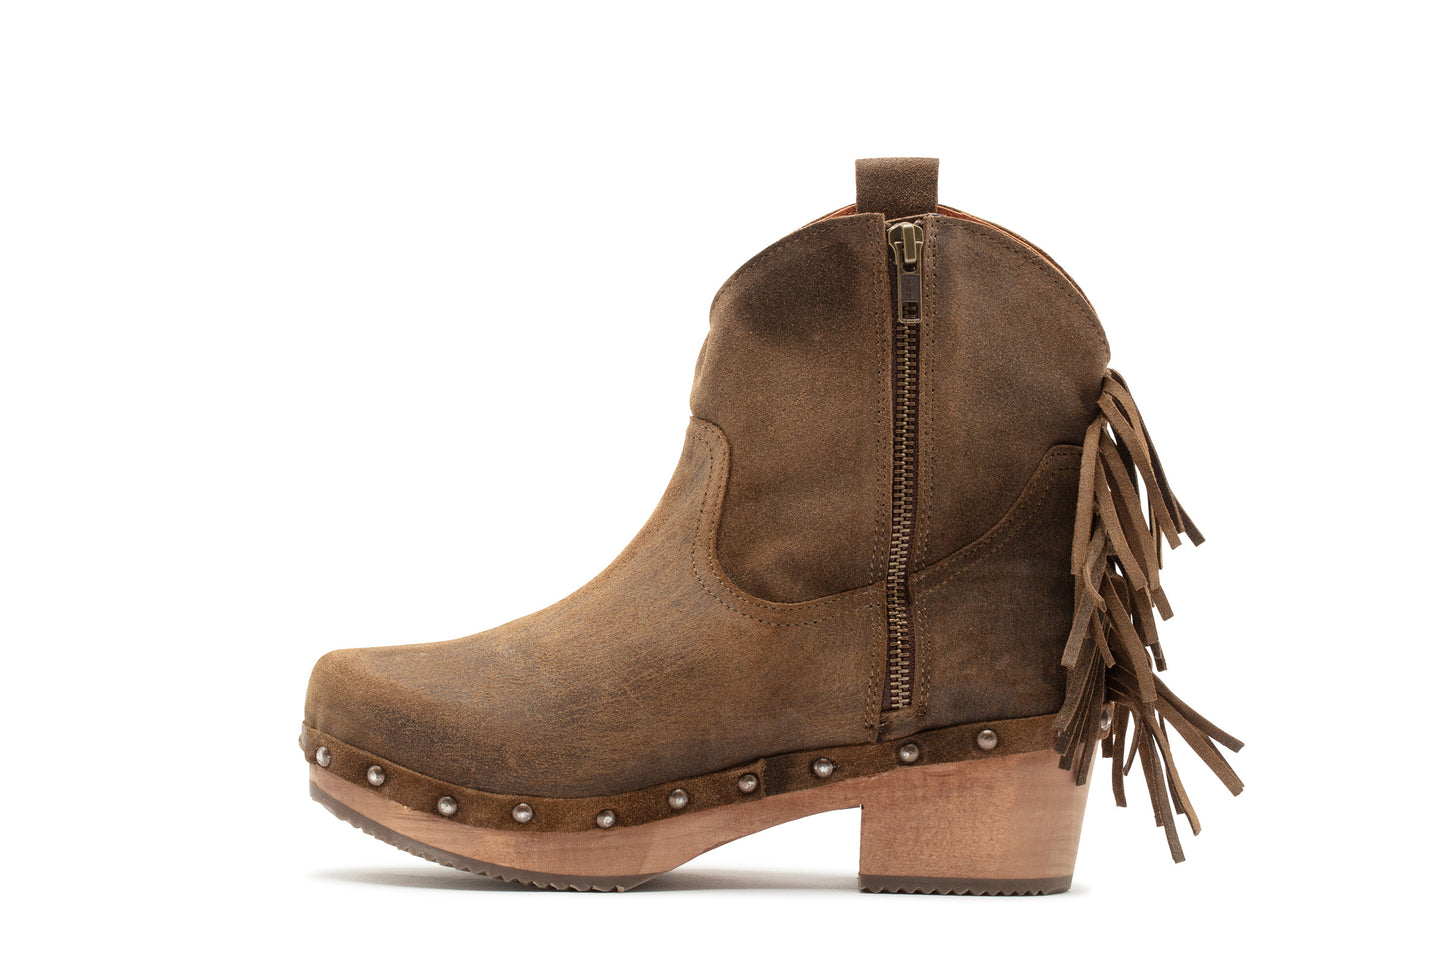 Low heel boots with fringes